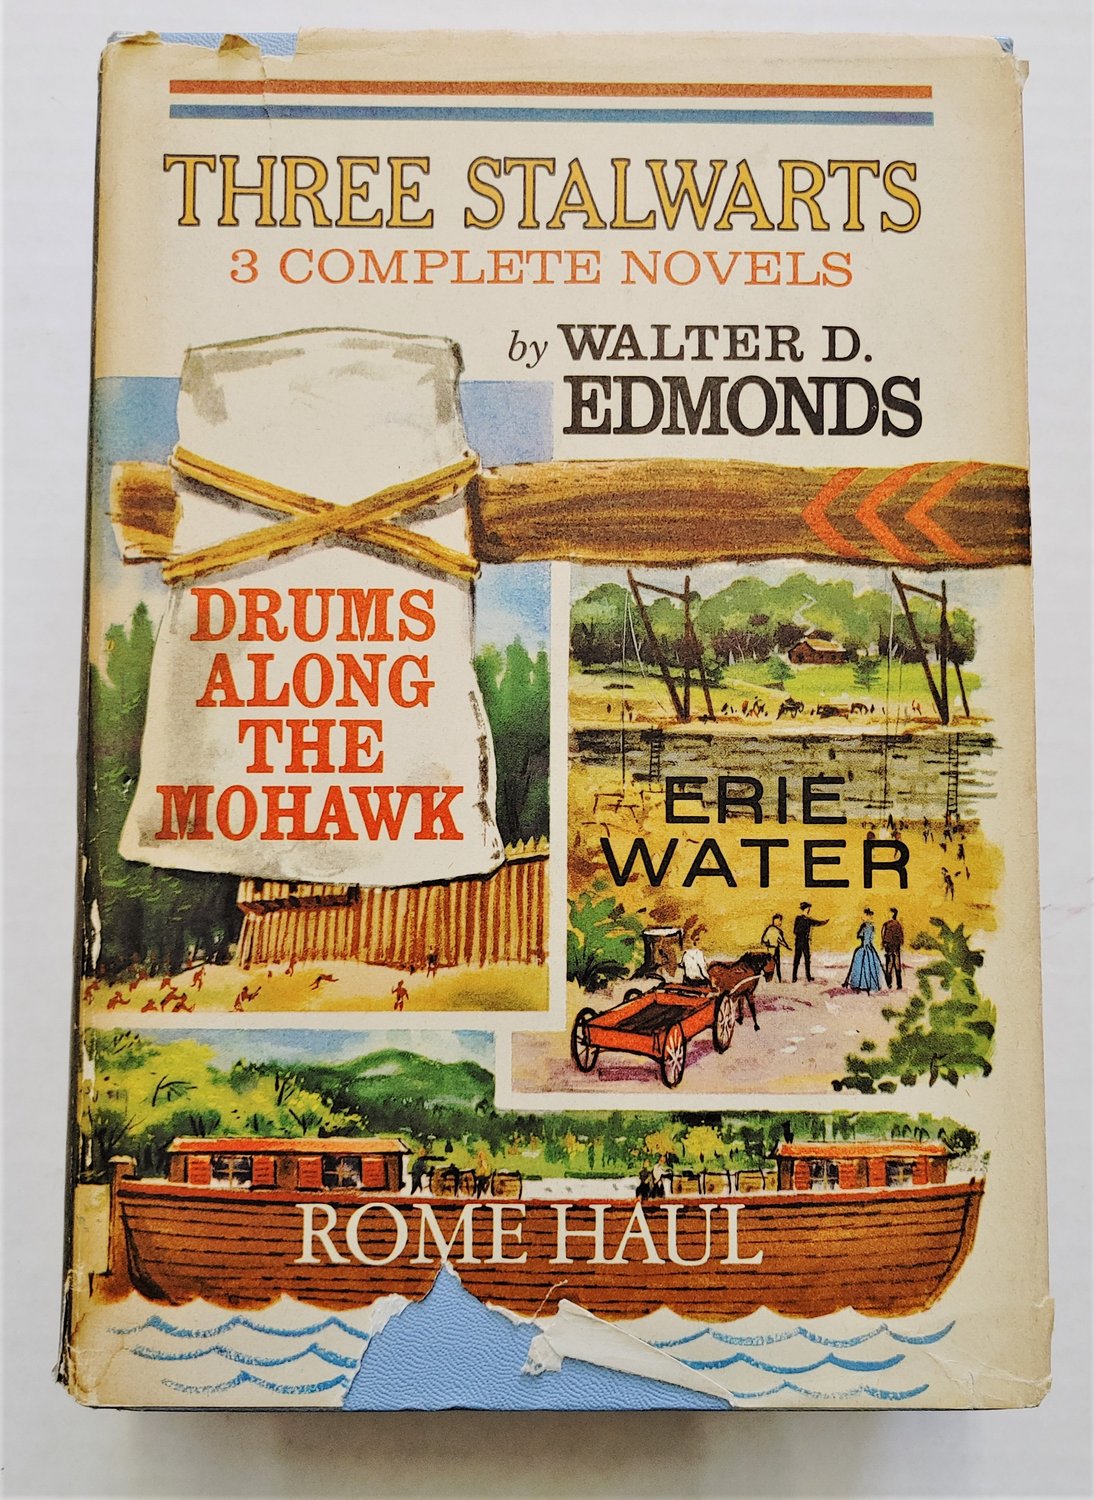 BOOKS — Books authored by Walter Edmonds include Drums Along the Mohawk, Mostly Canallers, The Boyds of Black River, and Three Stalwarts.